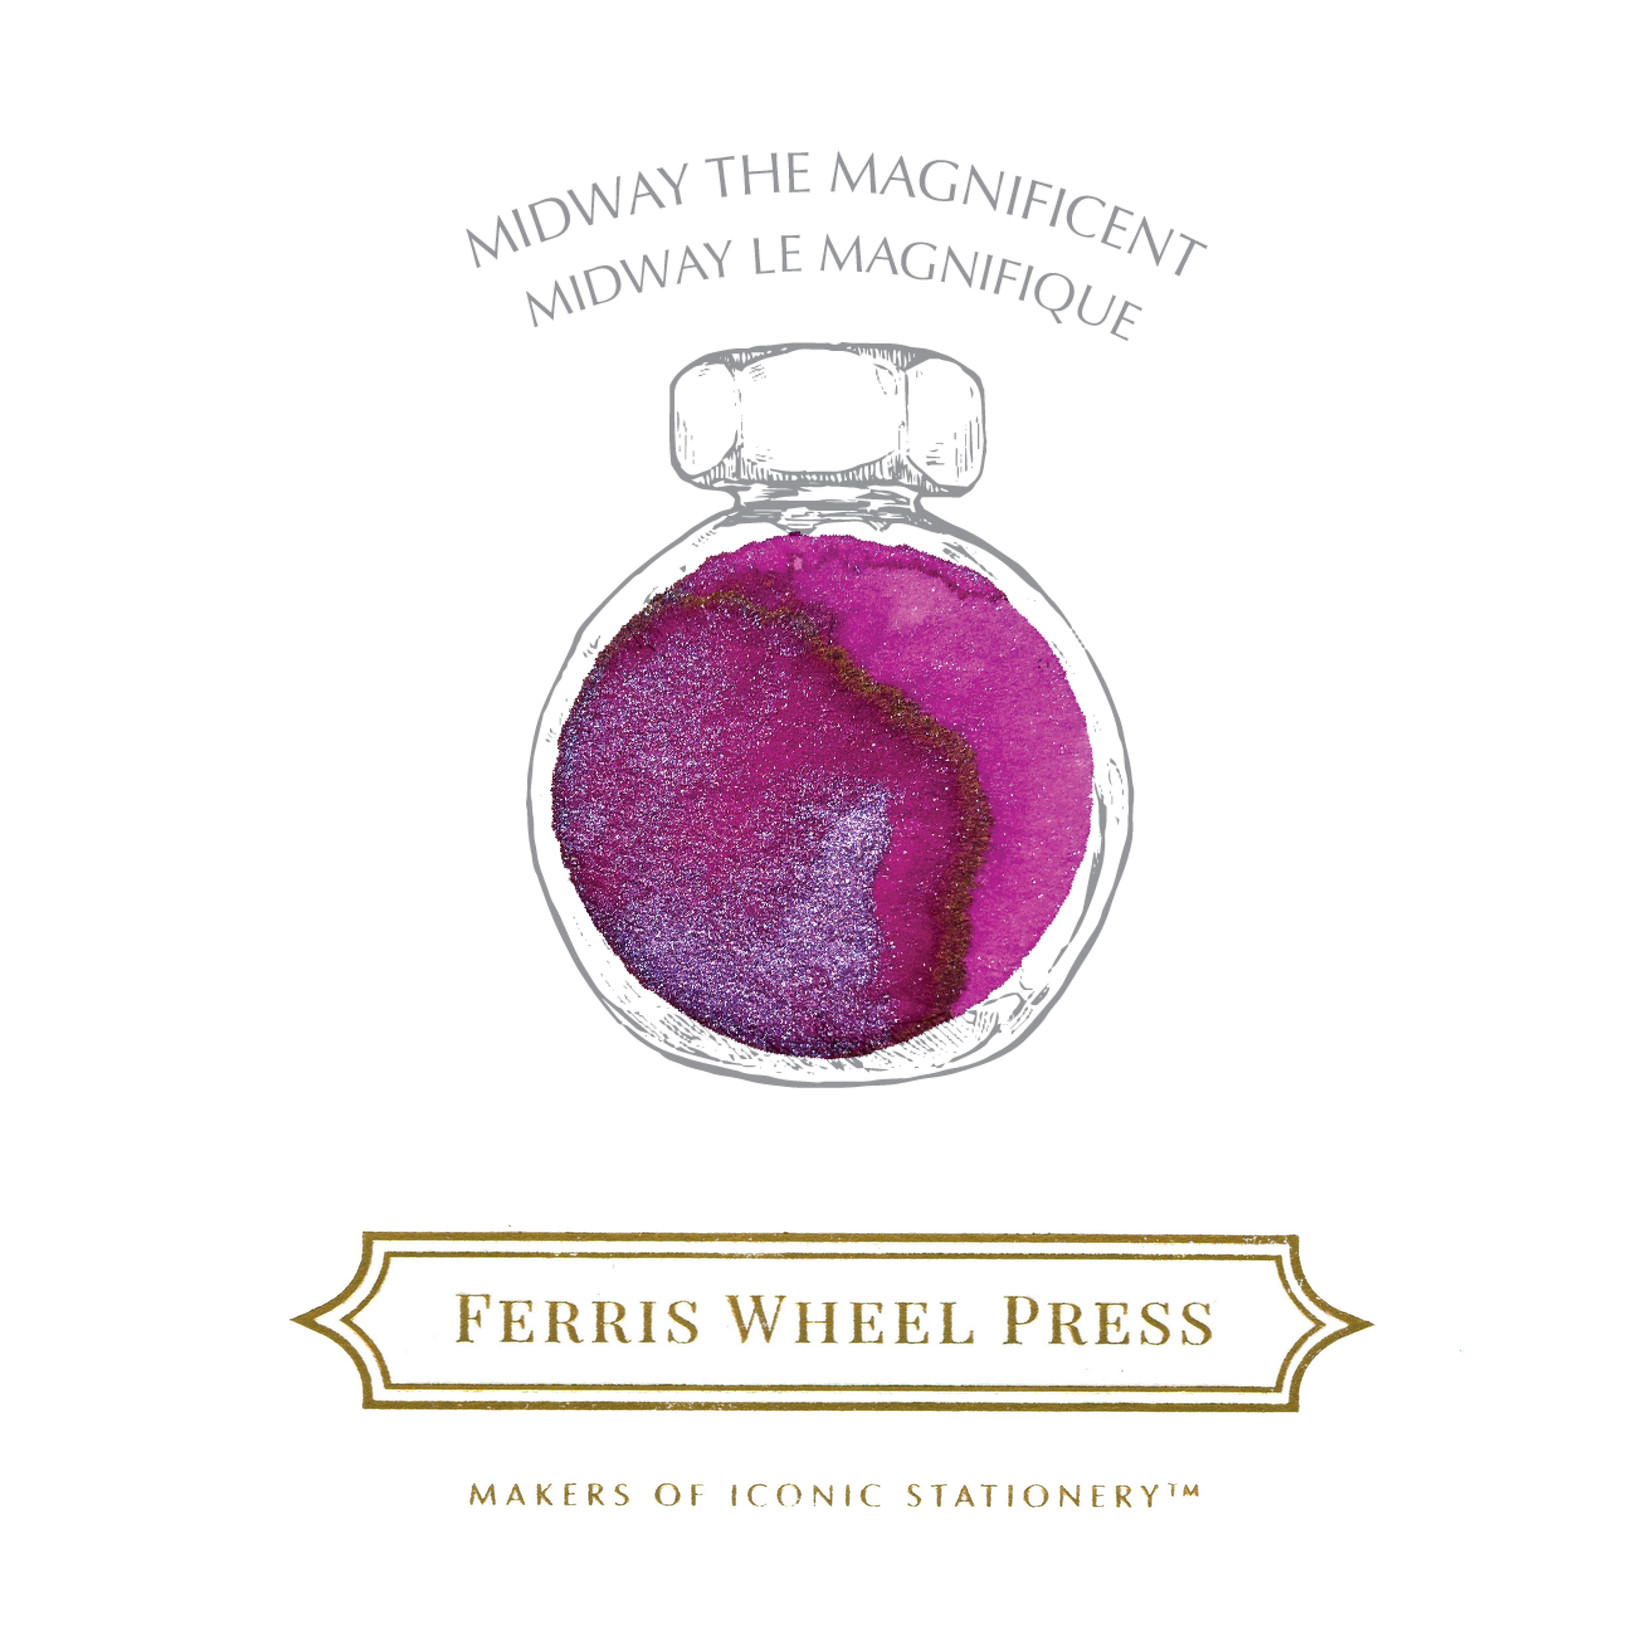 FERRIS WHEEL PRESS INK 38ML MIDWAY THE MAGNIFICENT